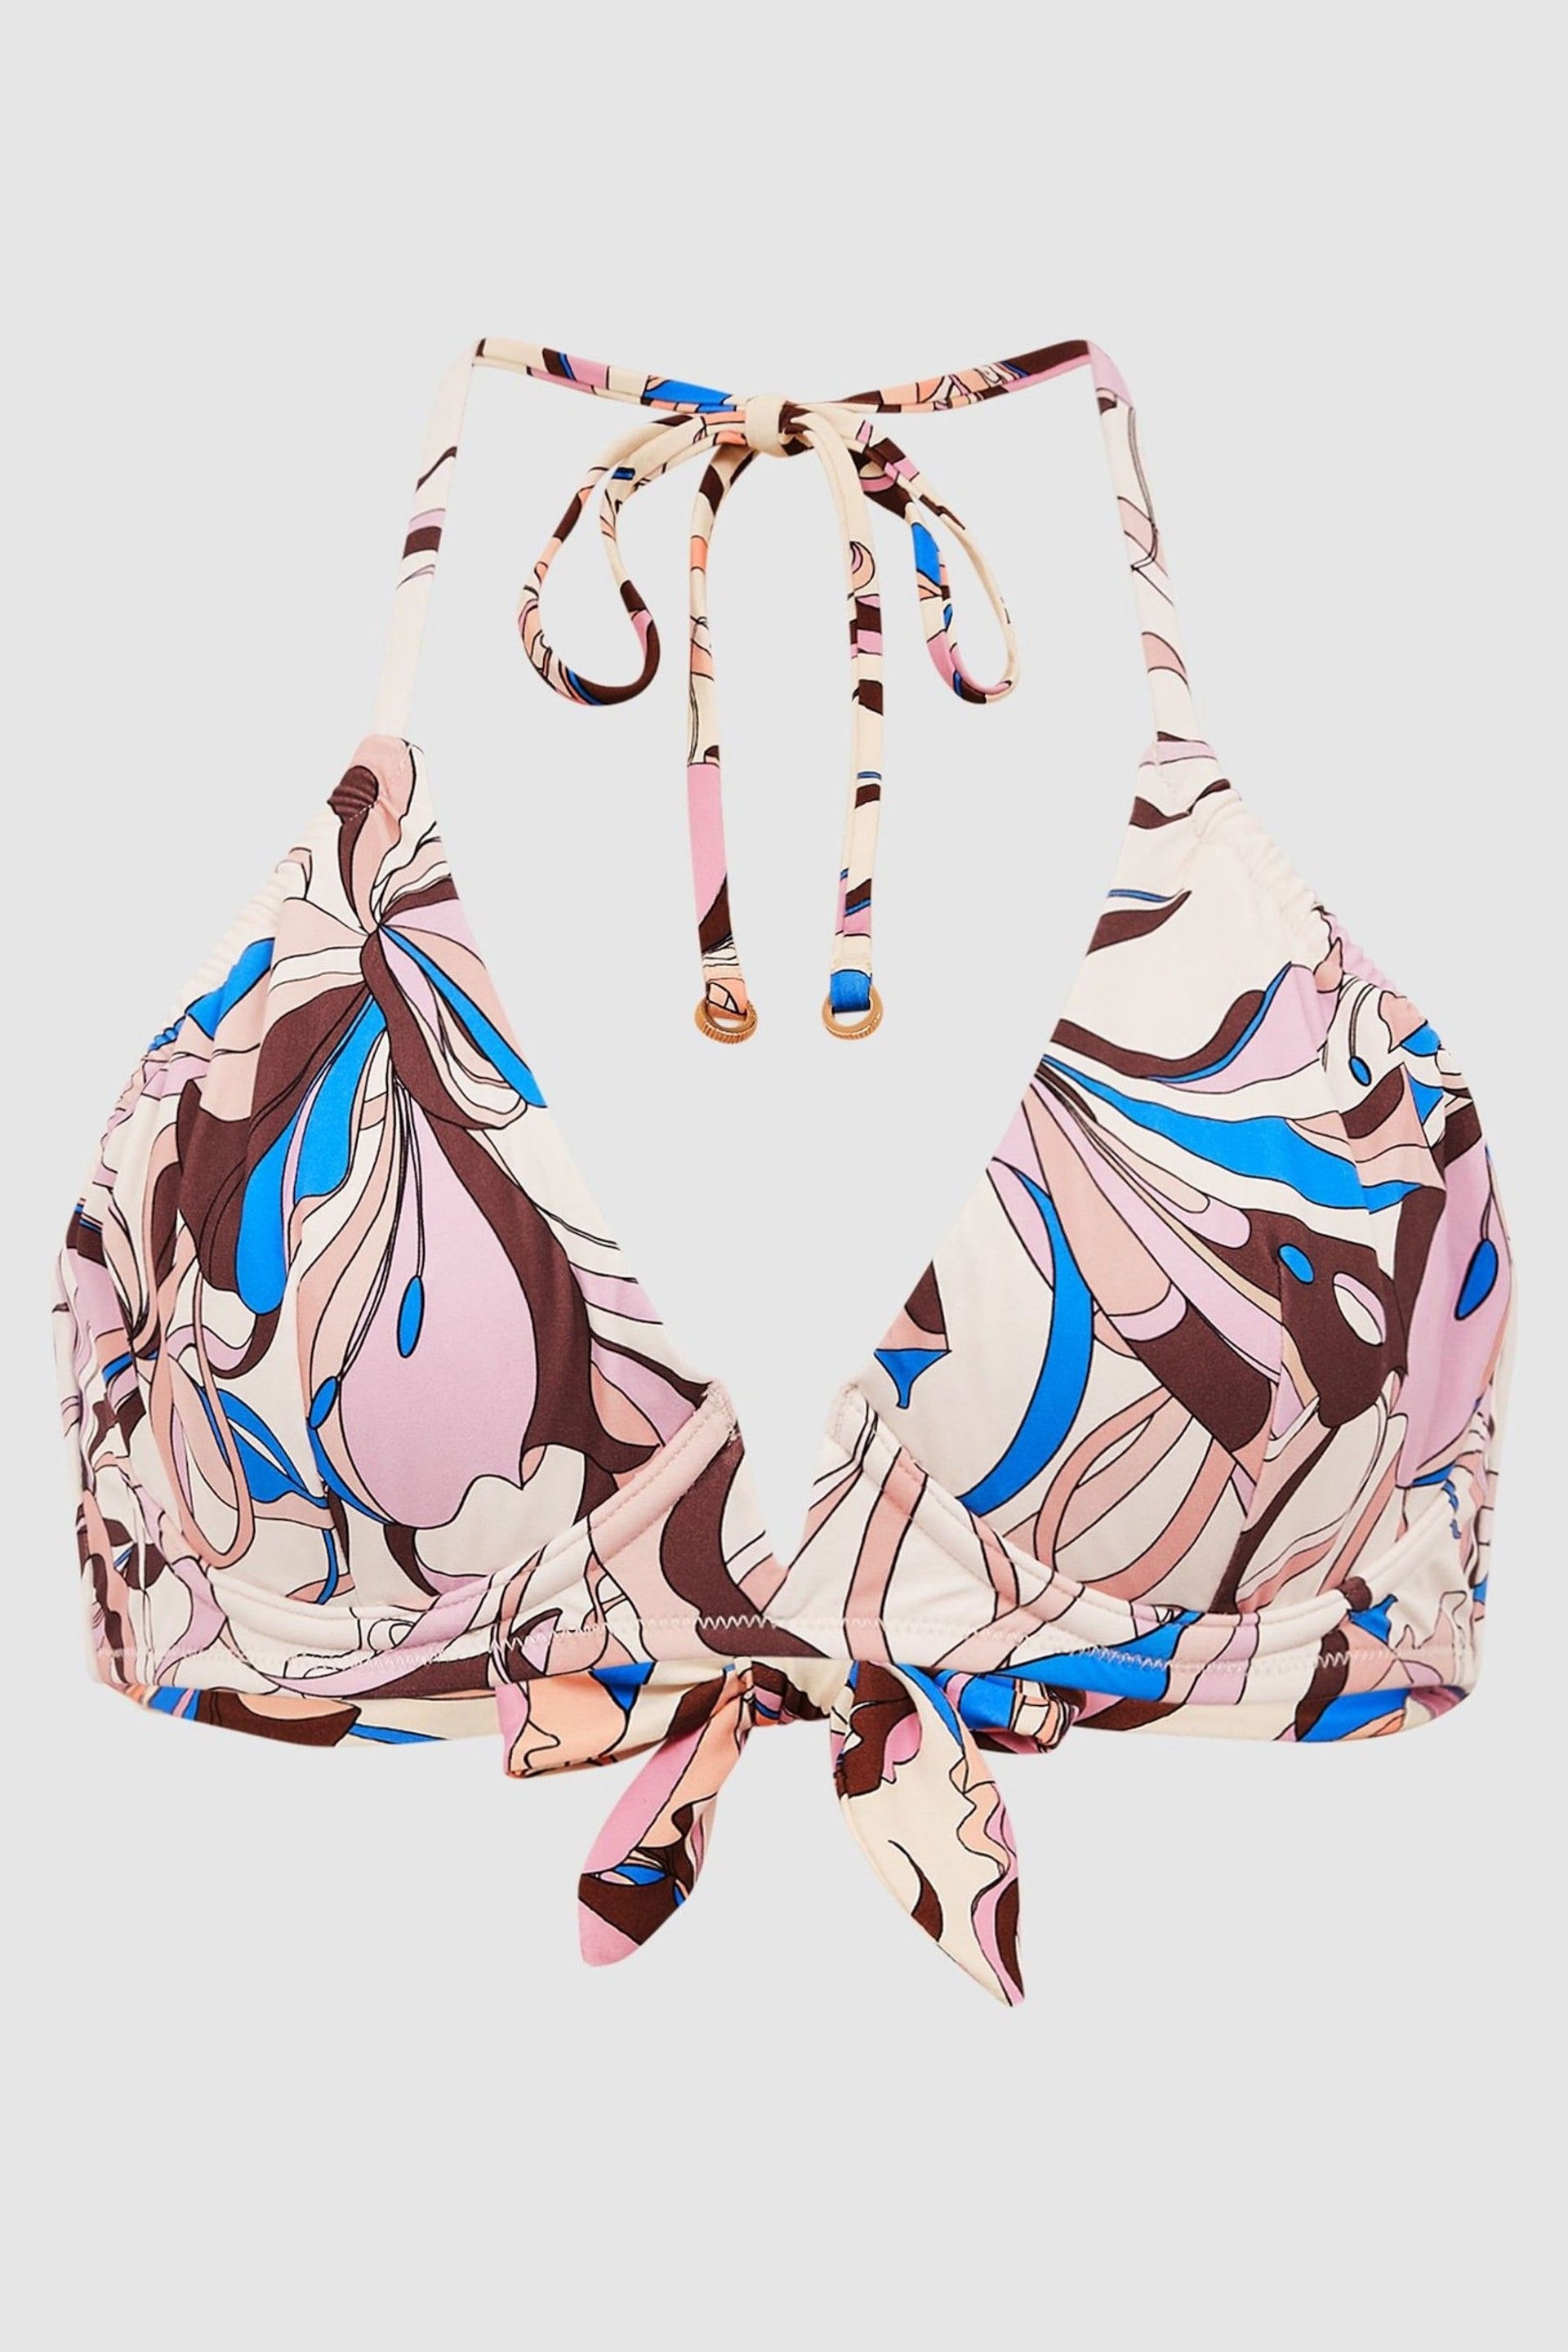 Reiss Multi Audrinna Underwired Abstract Print Triangle Bikini Top - Image 2 of 5